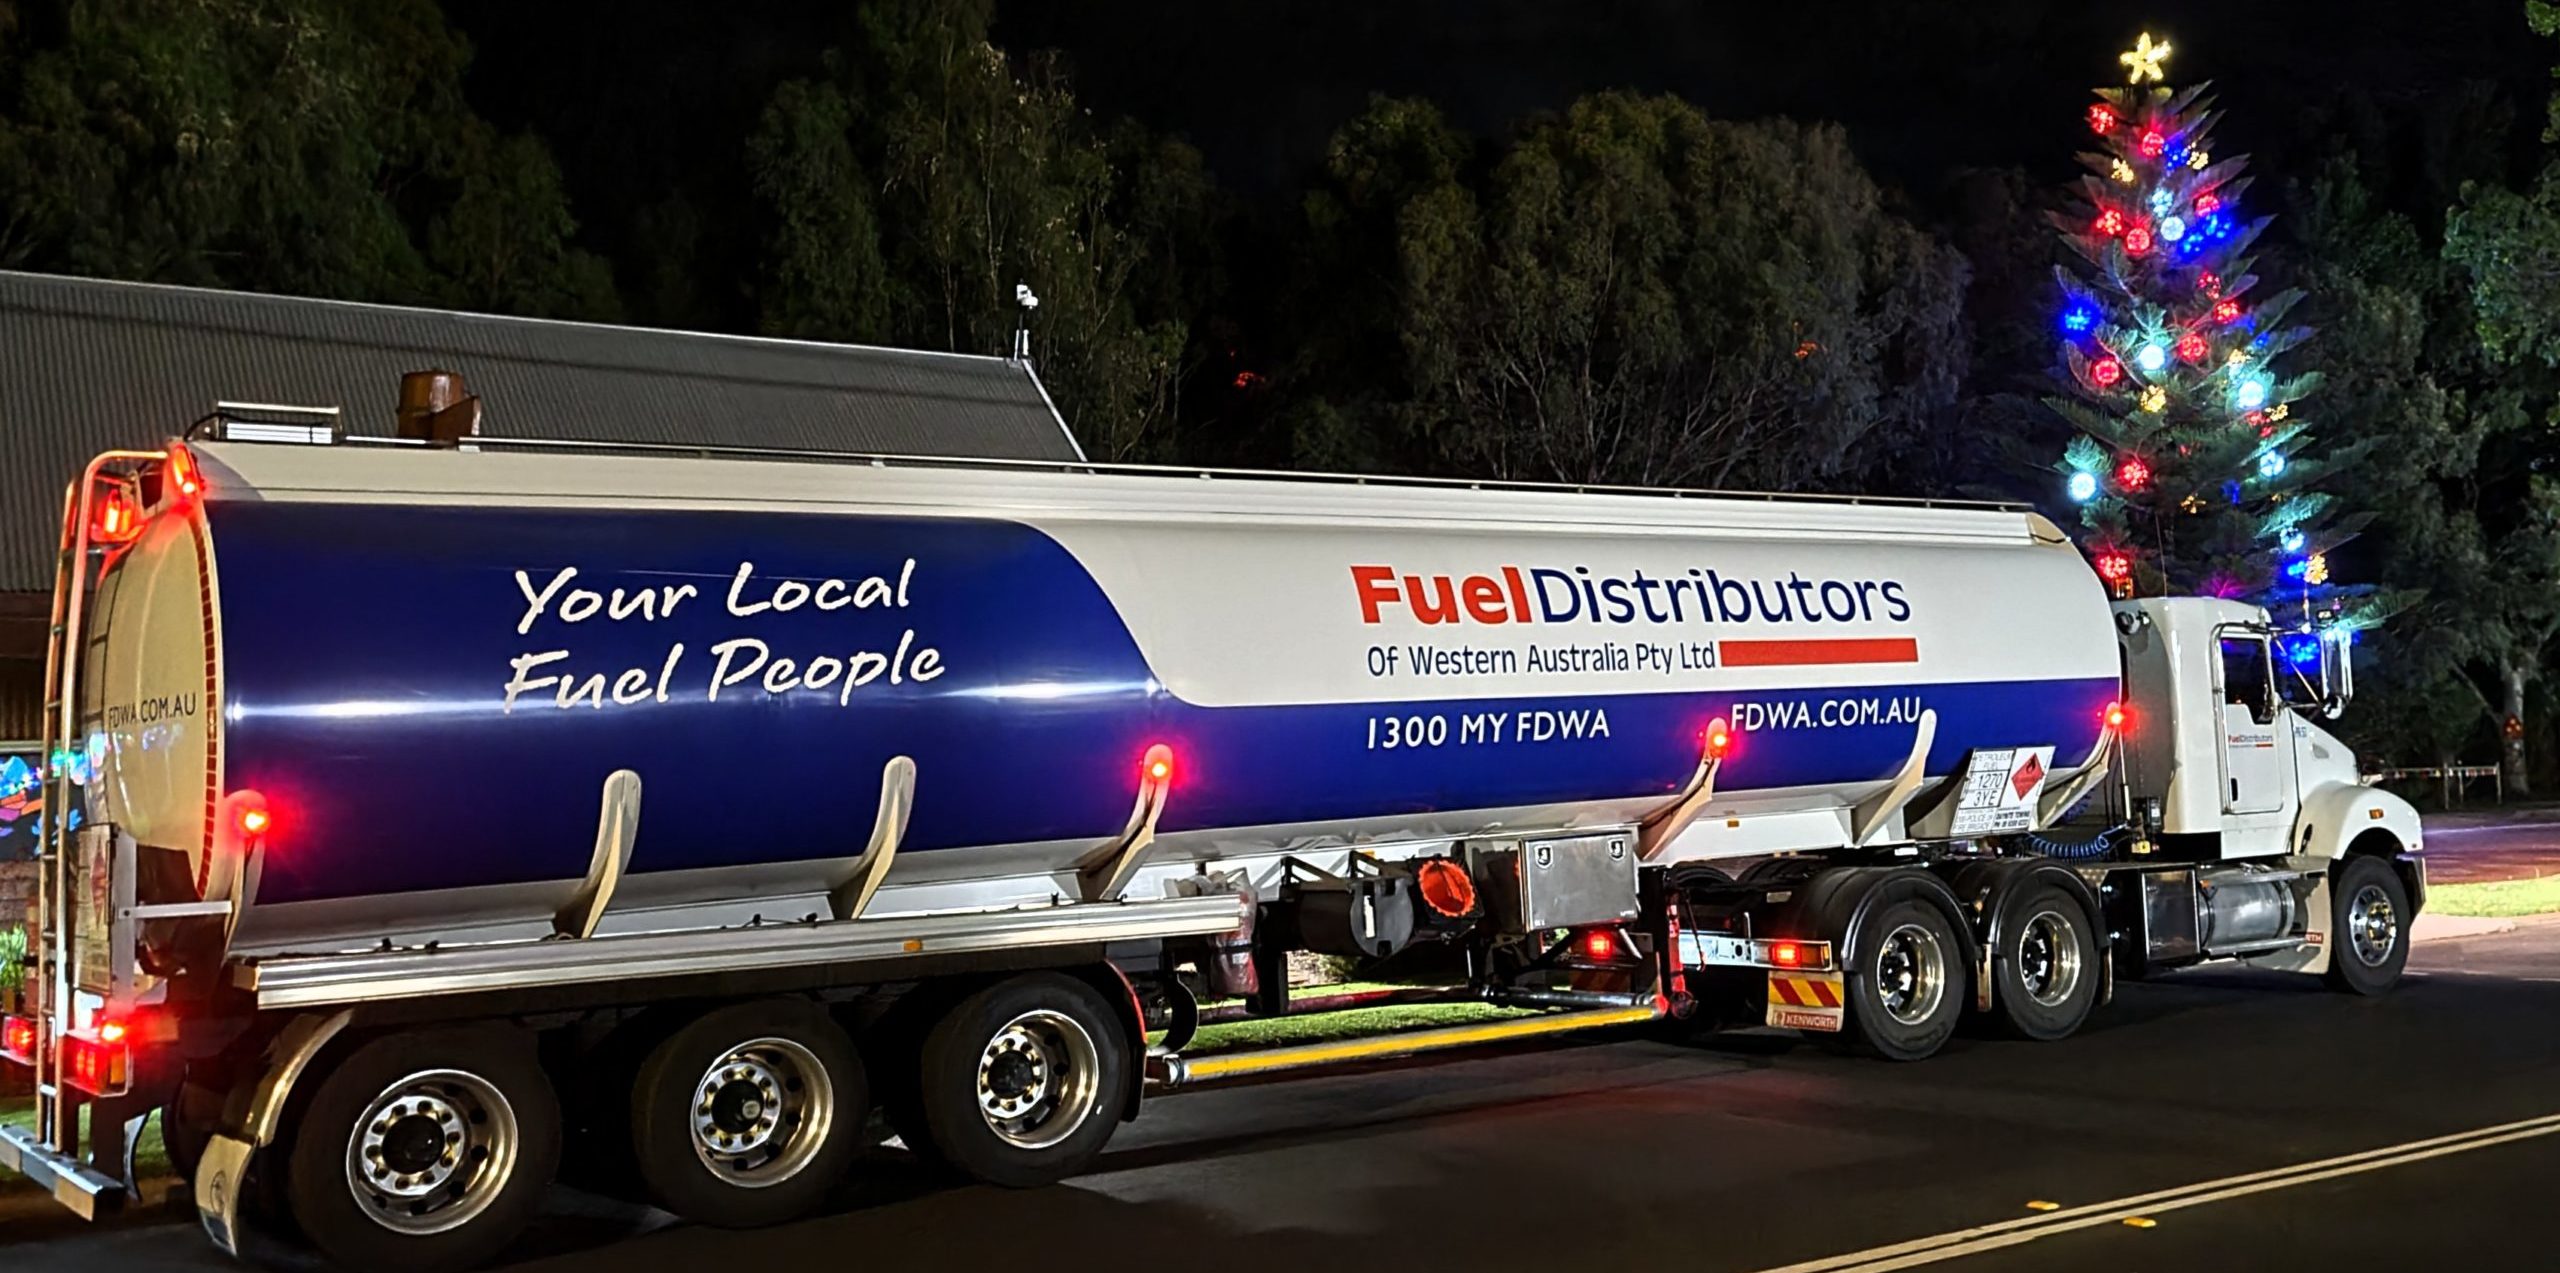 FDWA tanker at night time in front of a Christmas tree